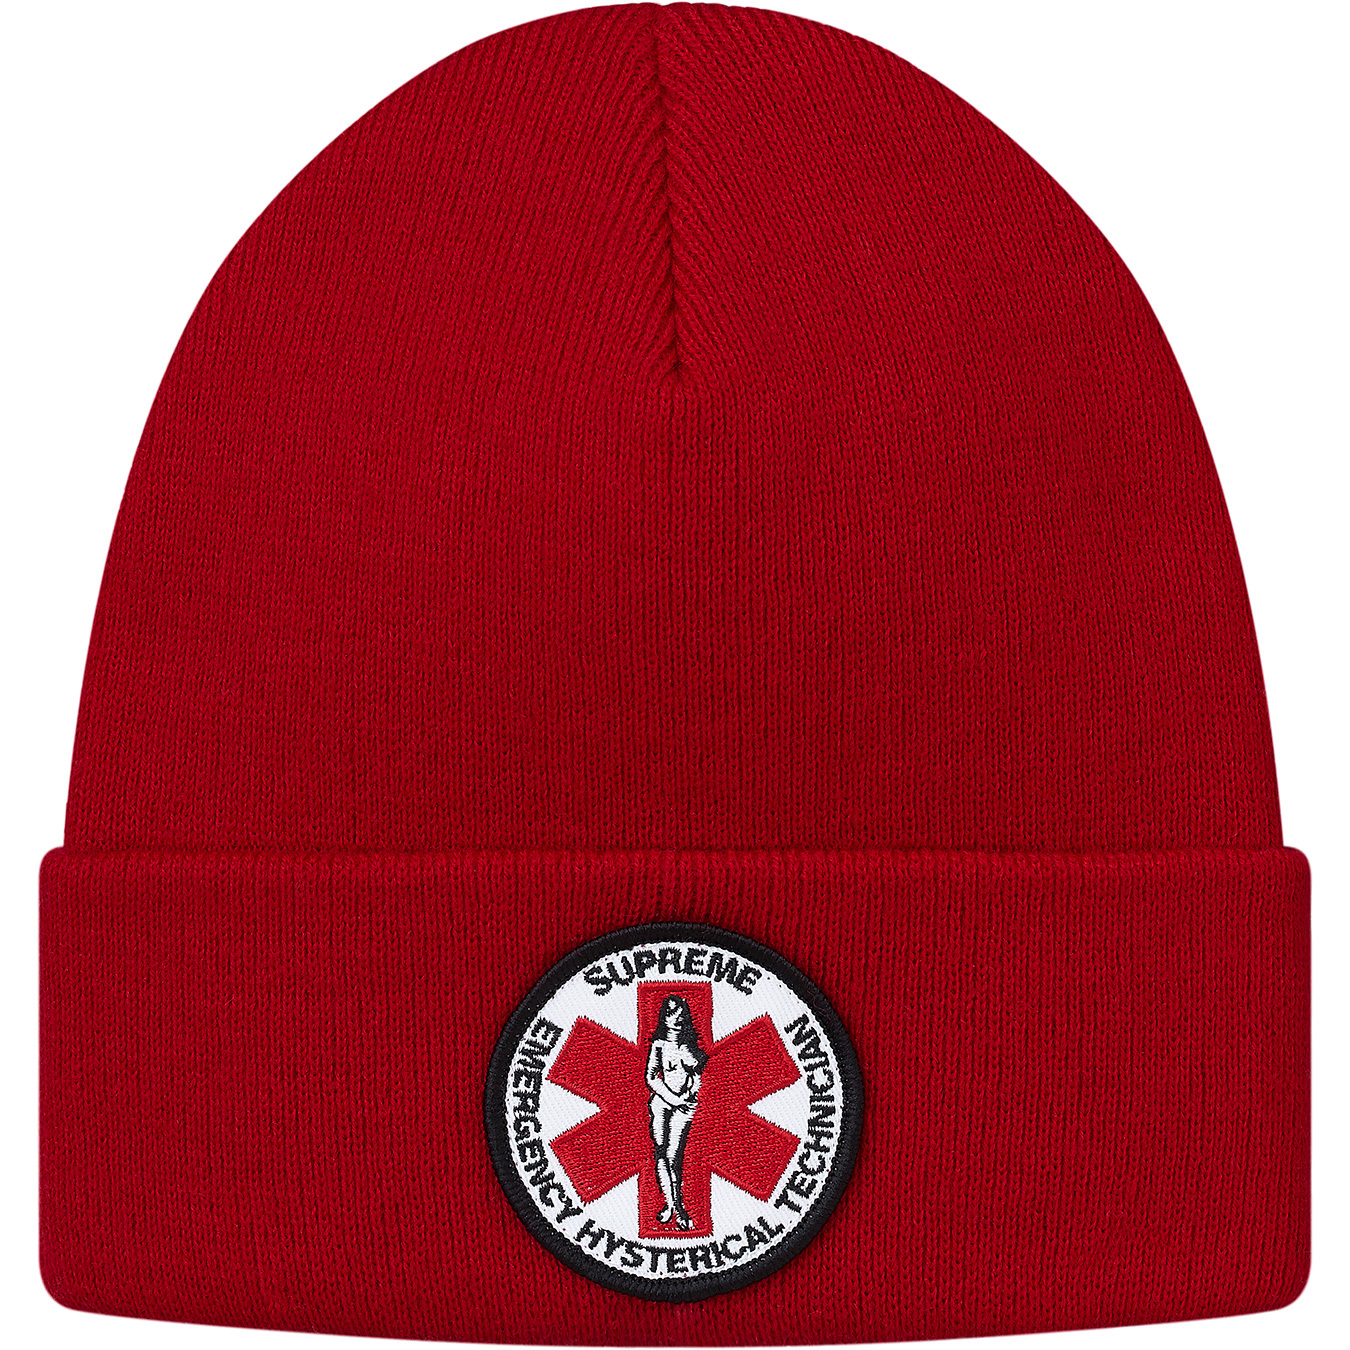 Supreme Hysteric Glamour Beanie Red - FW17 - GB